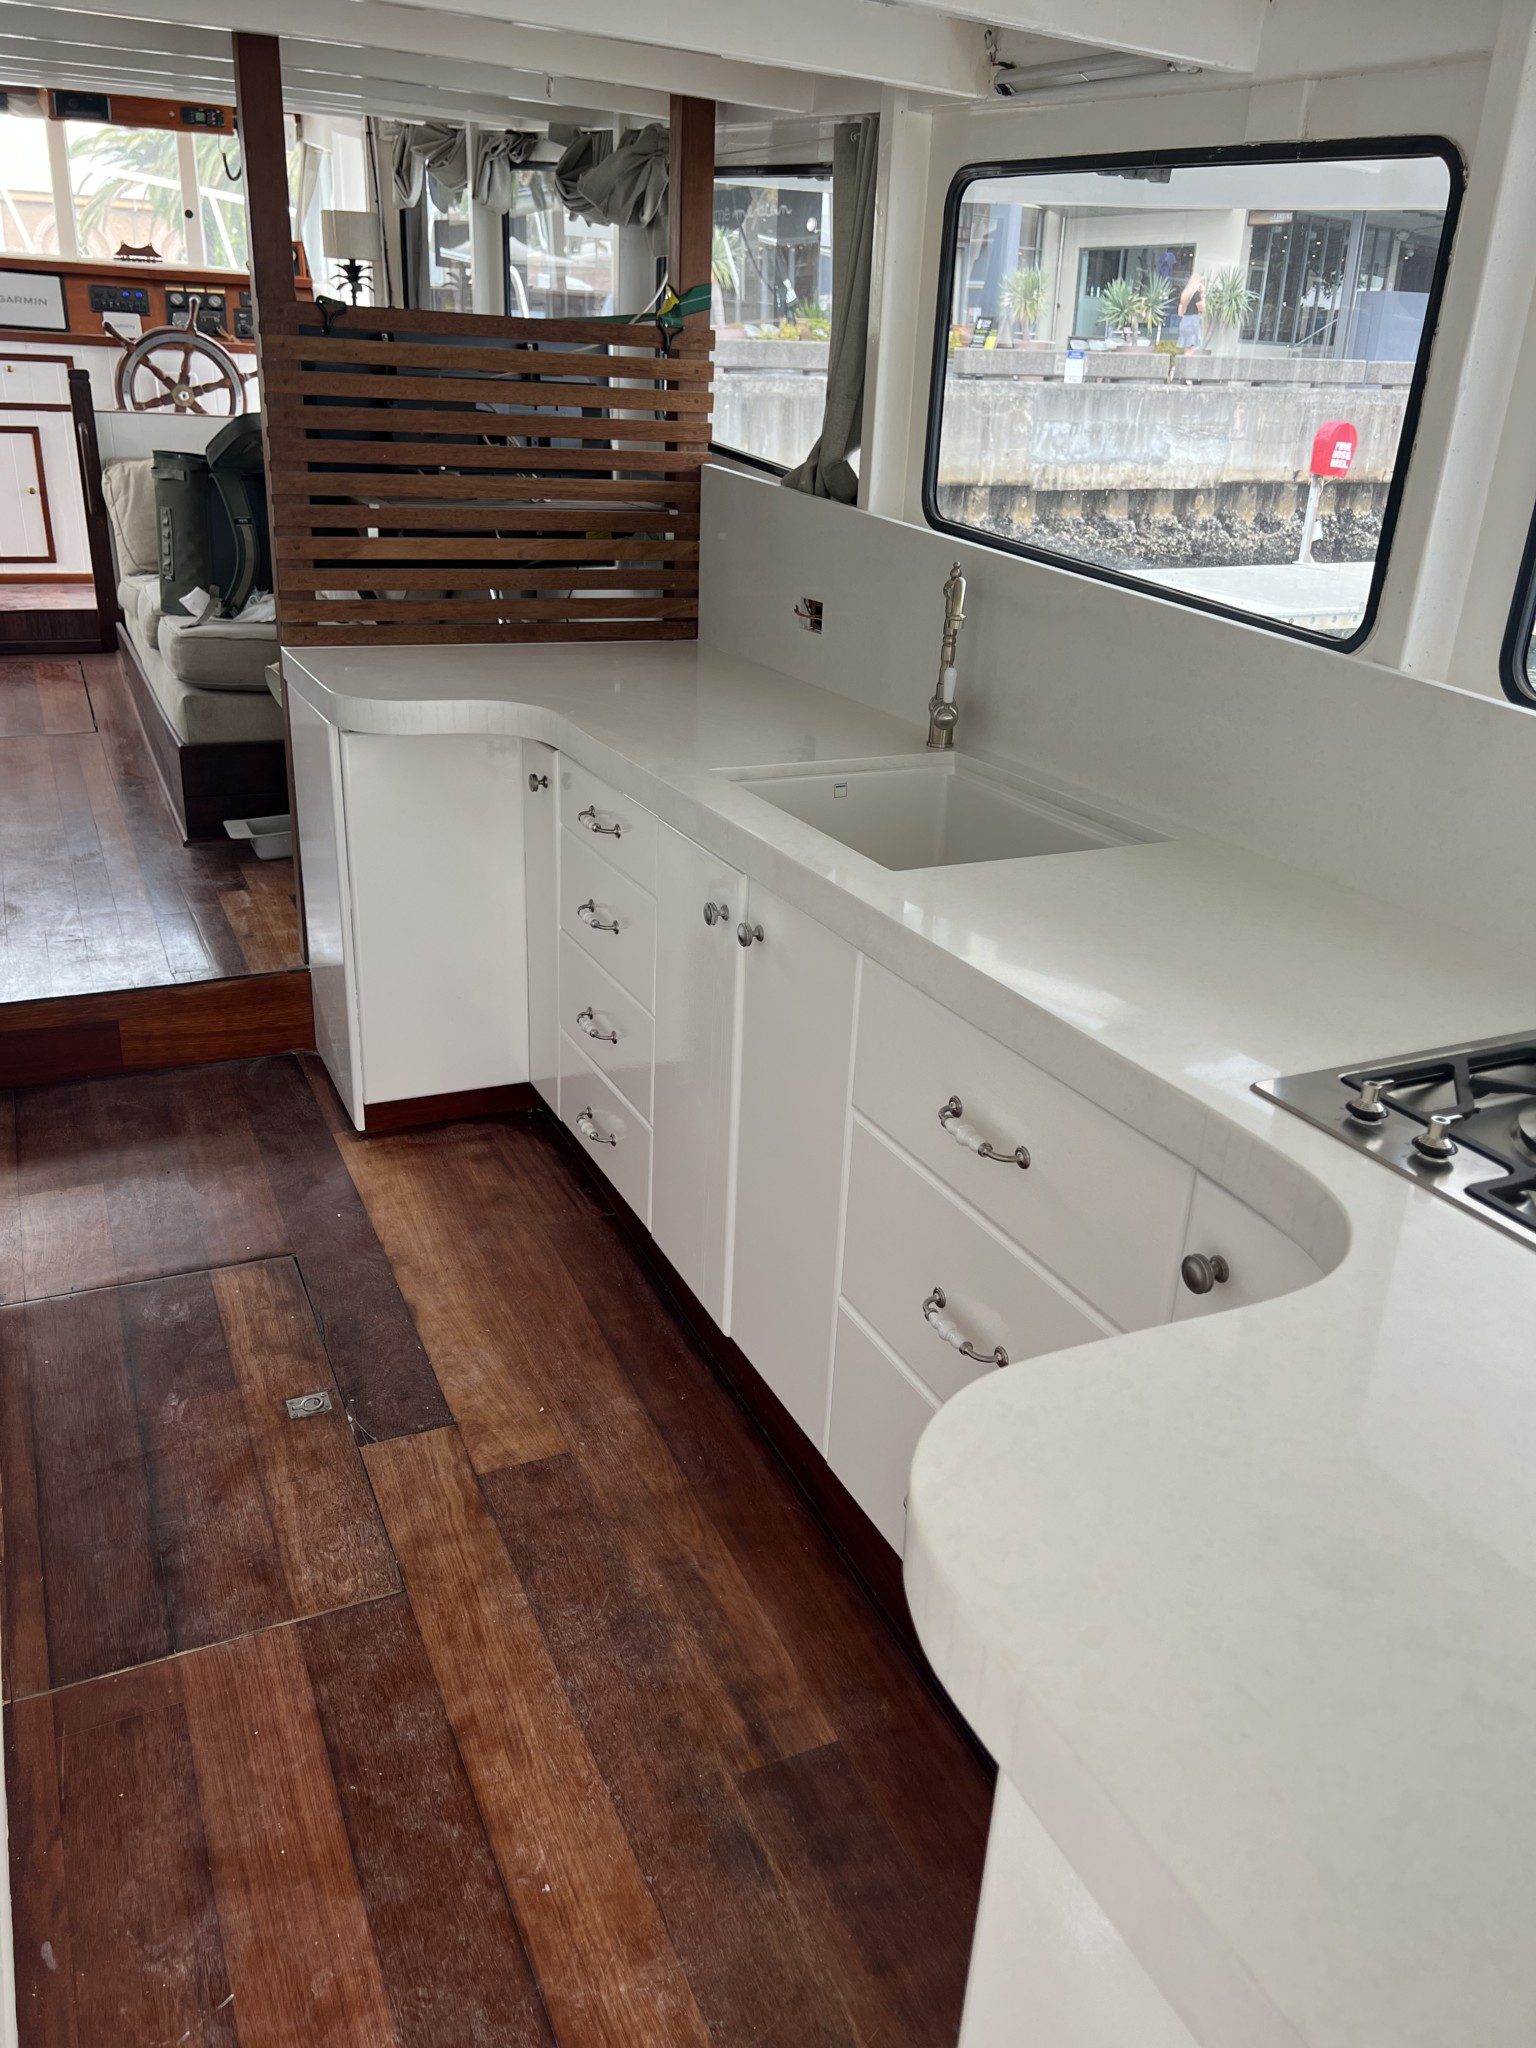 Converted Trawler Boat